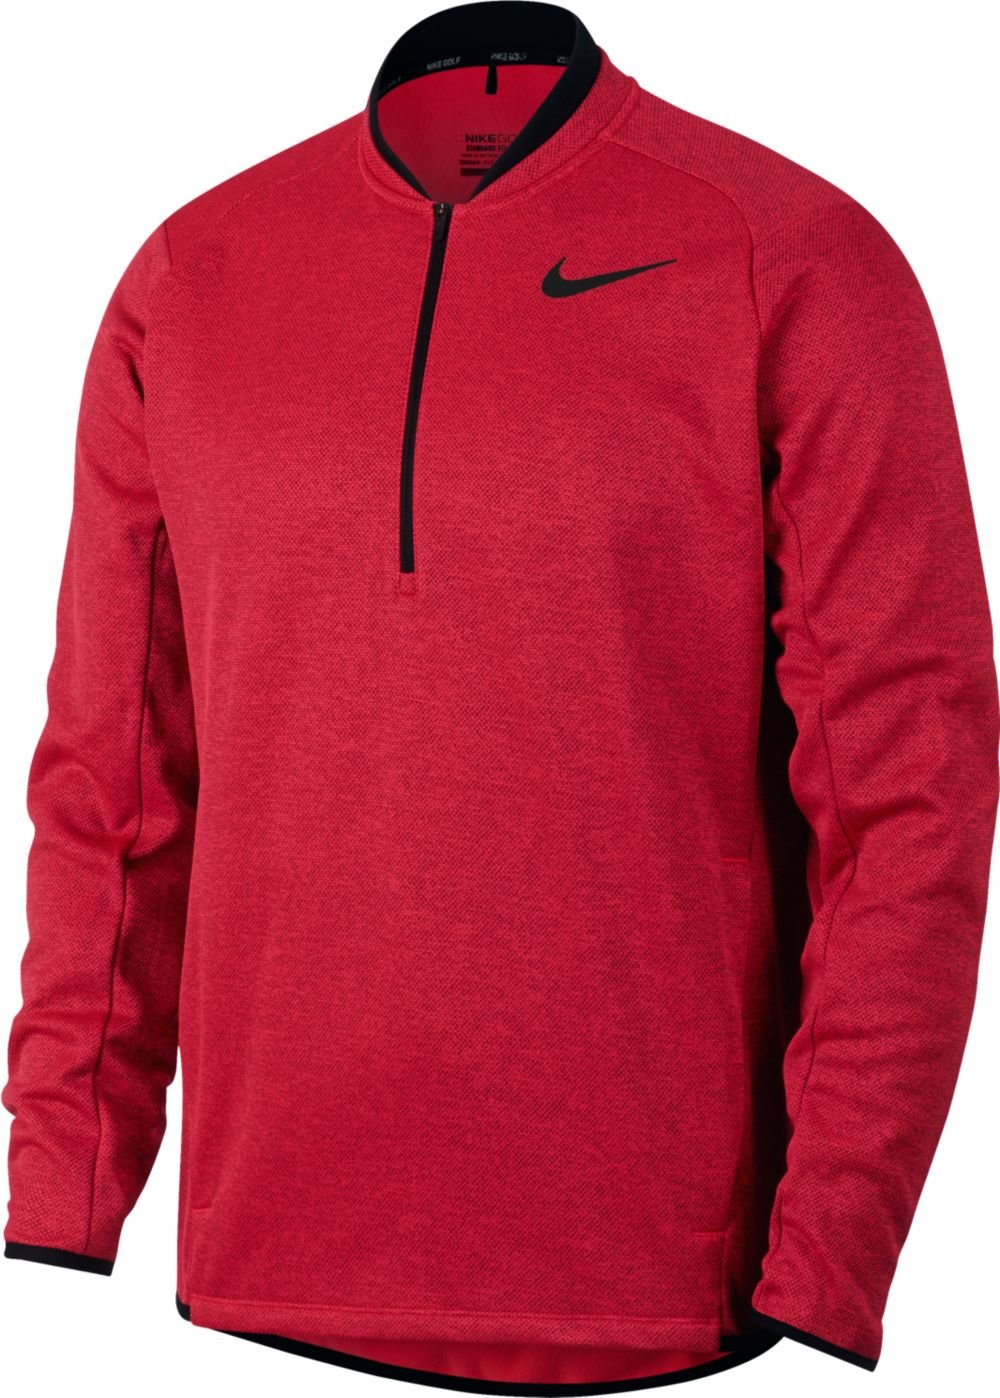 Mens Nike Therma Fit Golf Pullover Tops